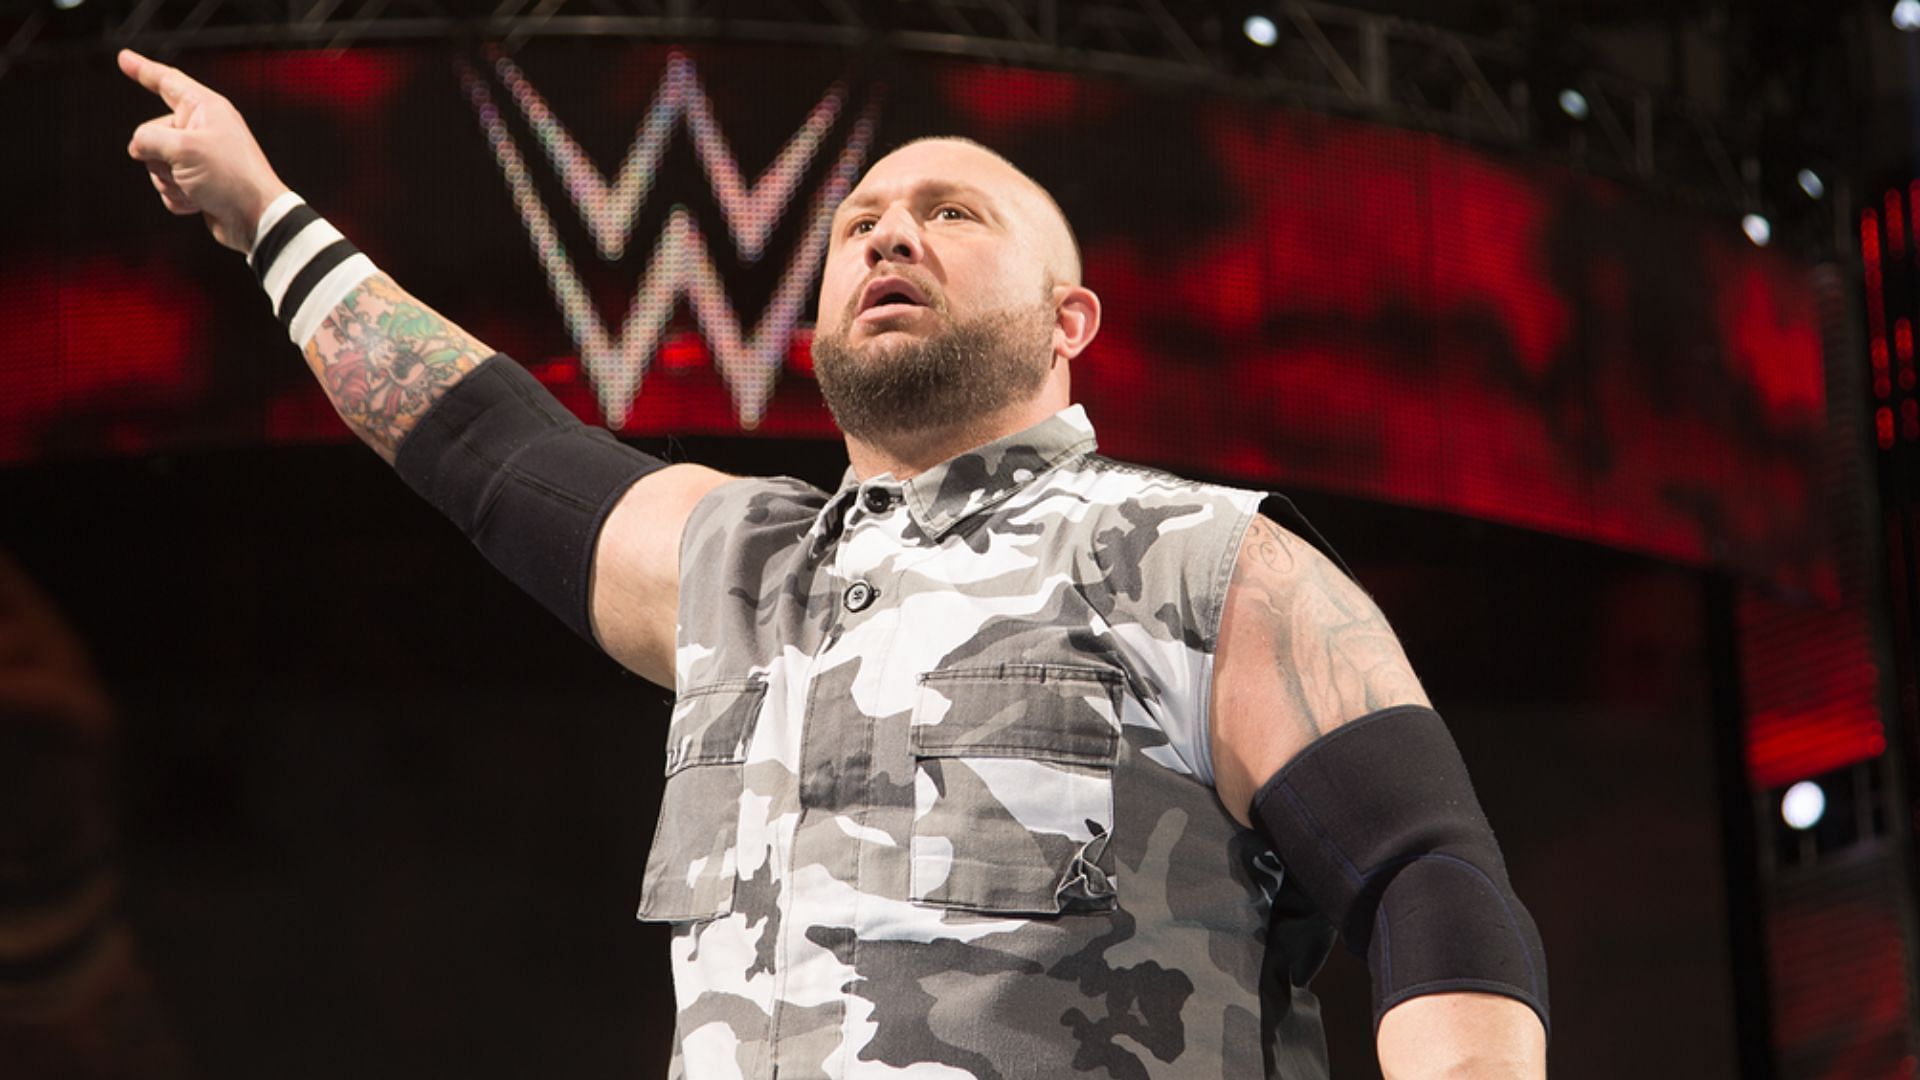 Find out which match WWE legend Bully Ray was talking about?